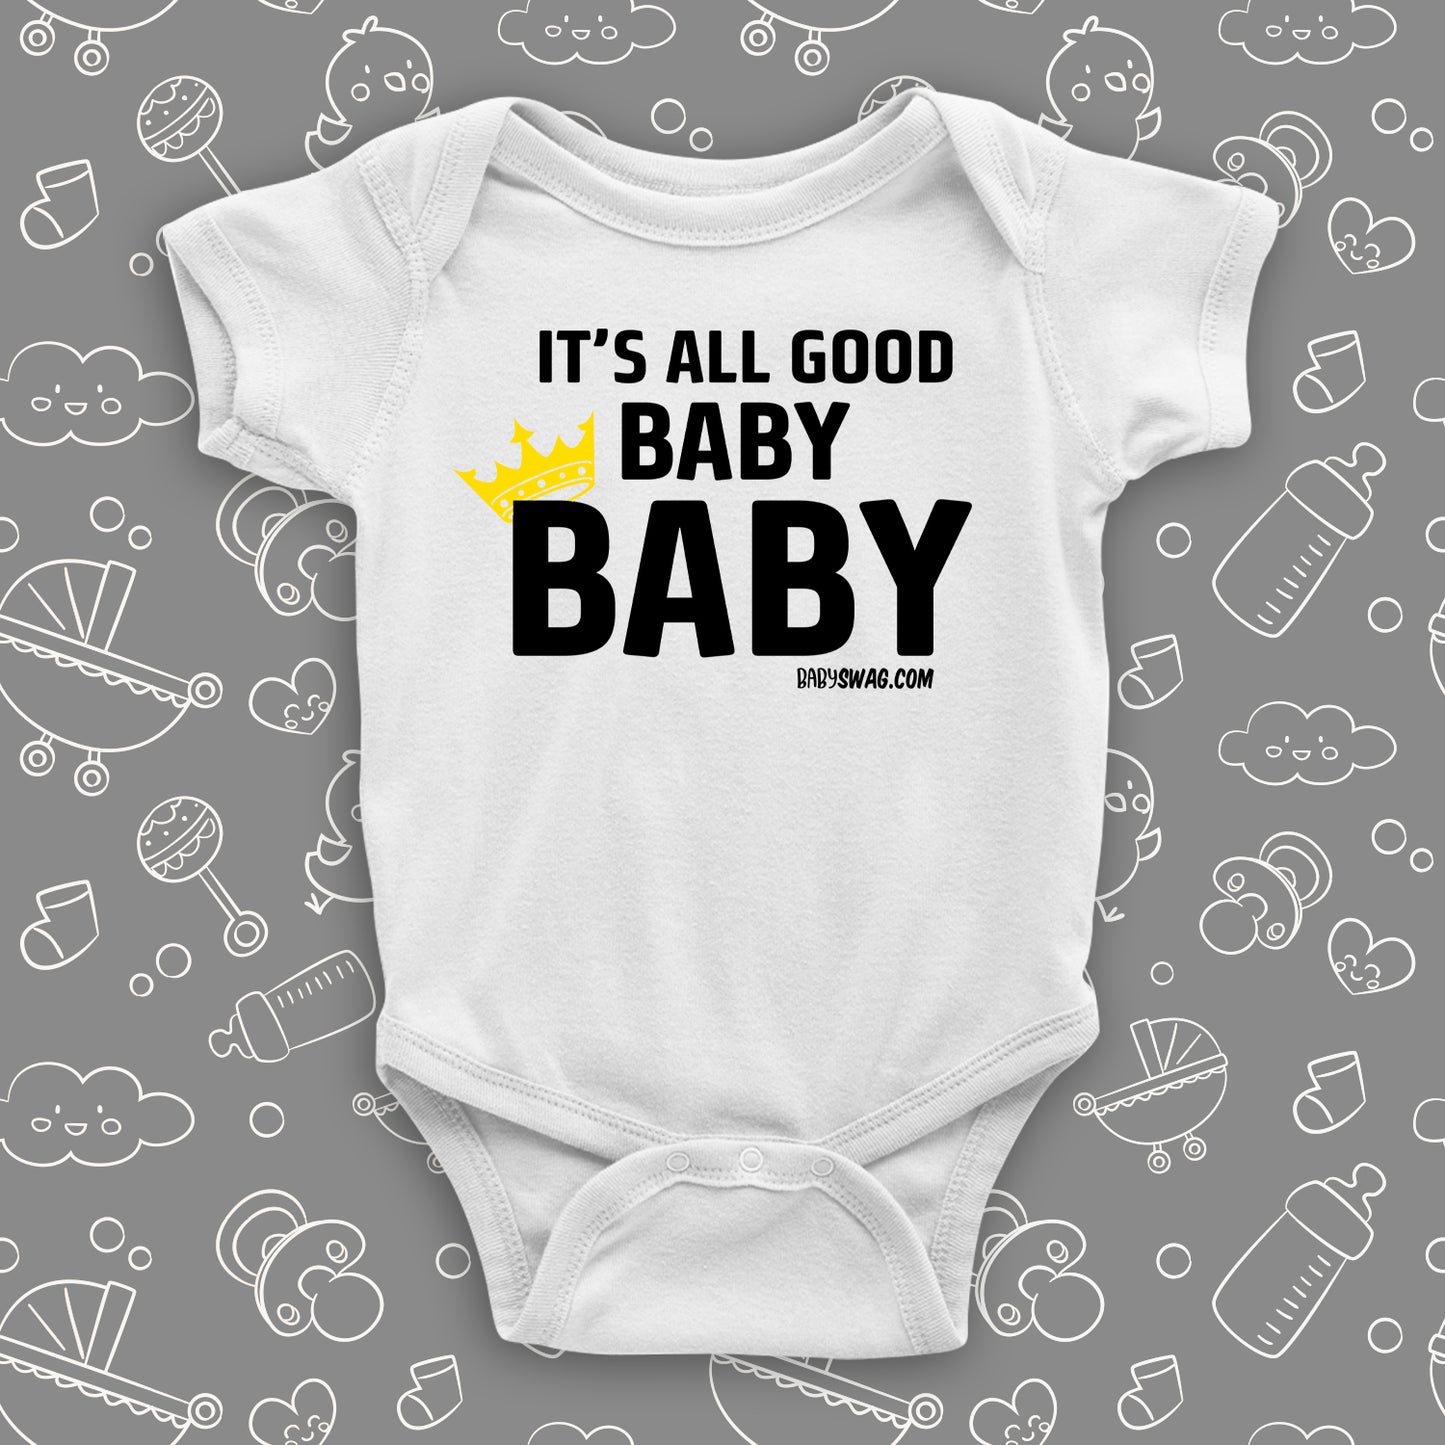 Cute baby onesie with saying "It's All Good Baby" in white.